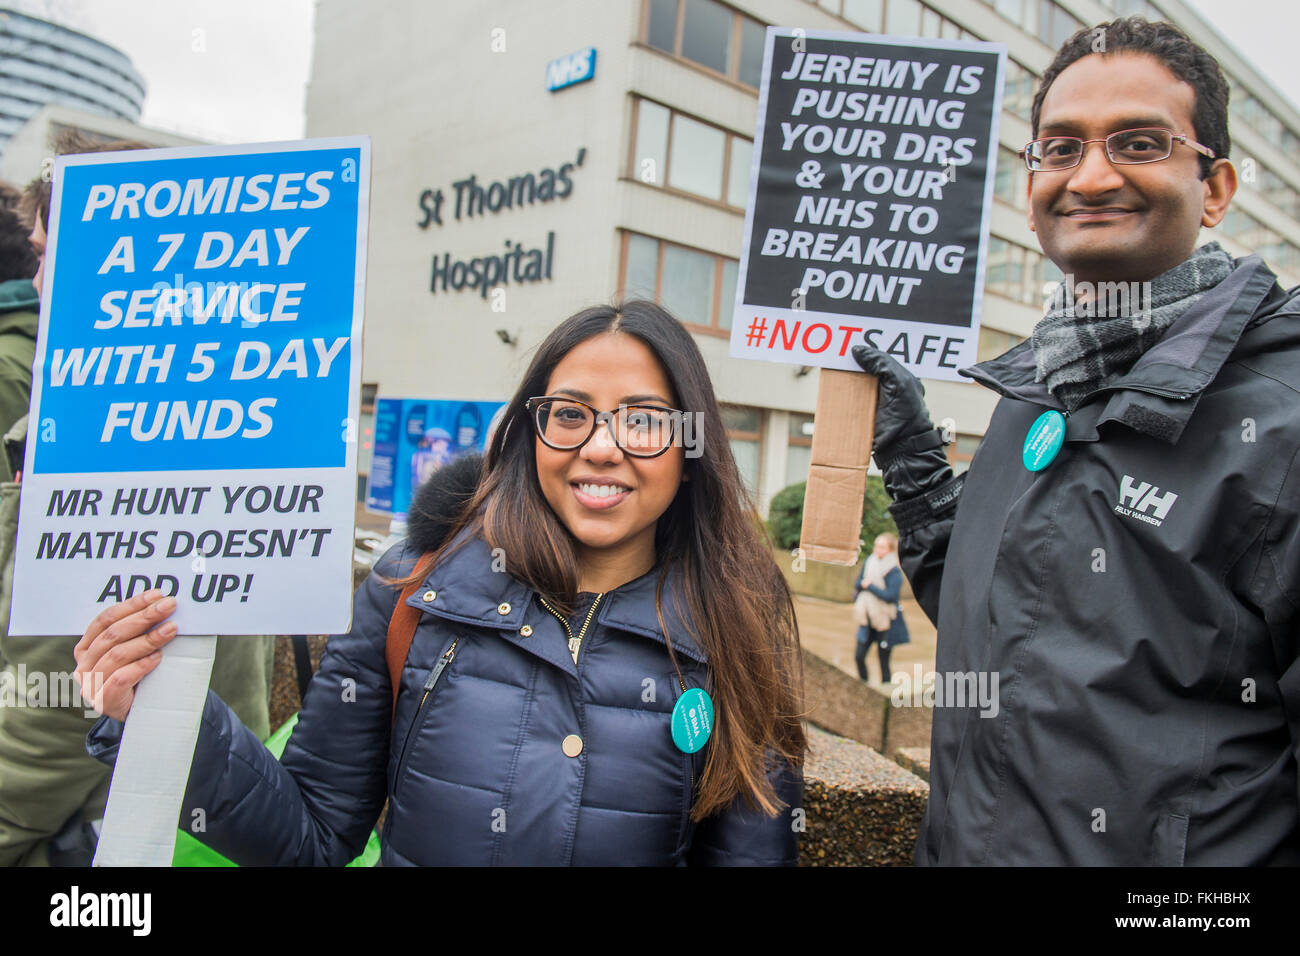 London, UK. 09th Mar, 2016. Ruha Chowdhury (L) and another Registrar (who  is heading to Australia in 3 weeks) join the protest - The picket line at  St Thomas' Hospital. Junior Doctors